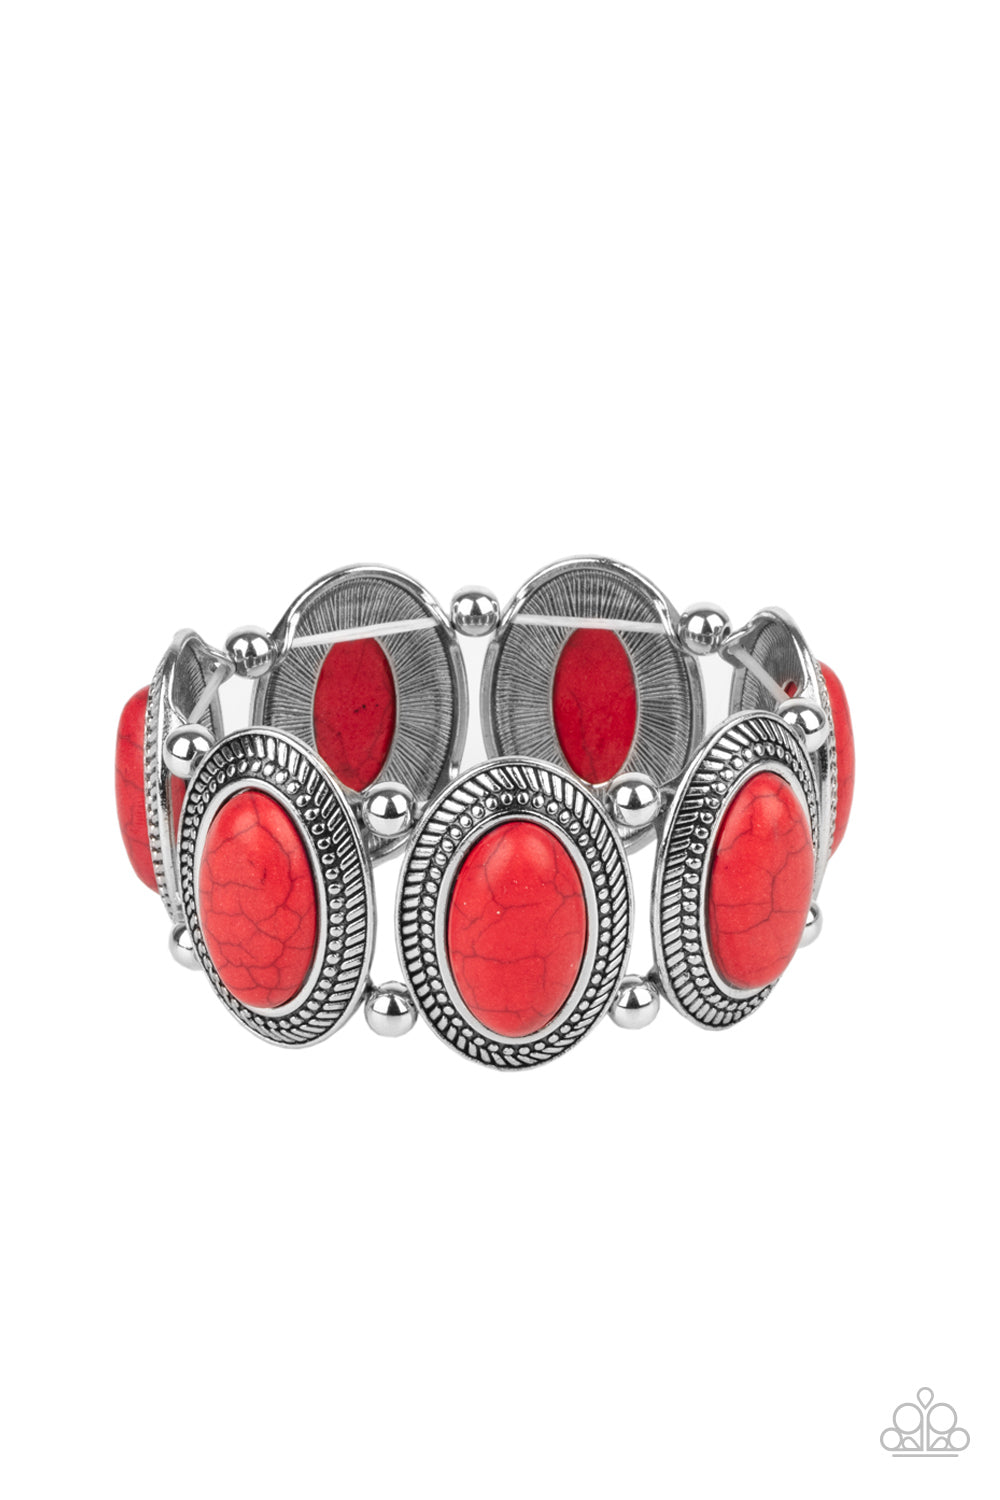 Paparazzi Accessories Until the Cows Come HOMESTEAD - Red Bracelets - Lady T Accessories